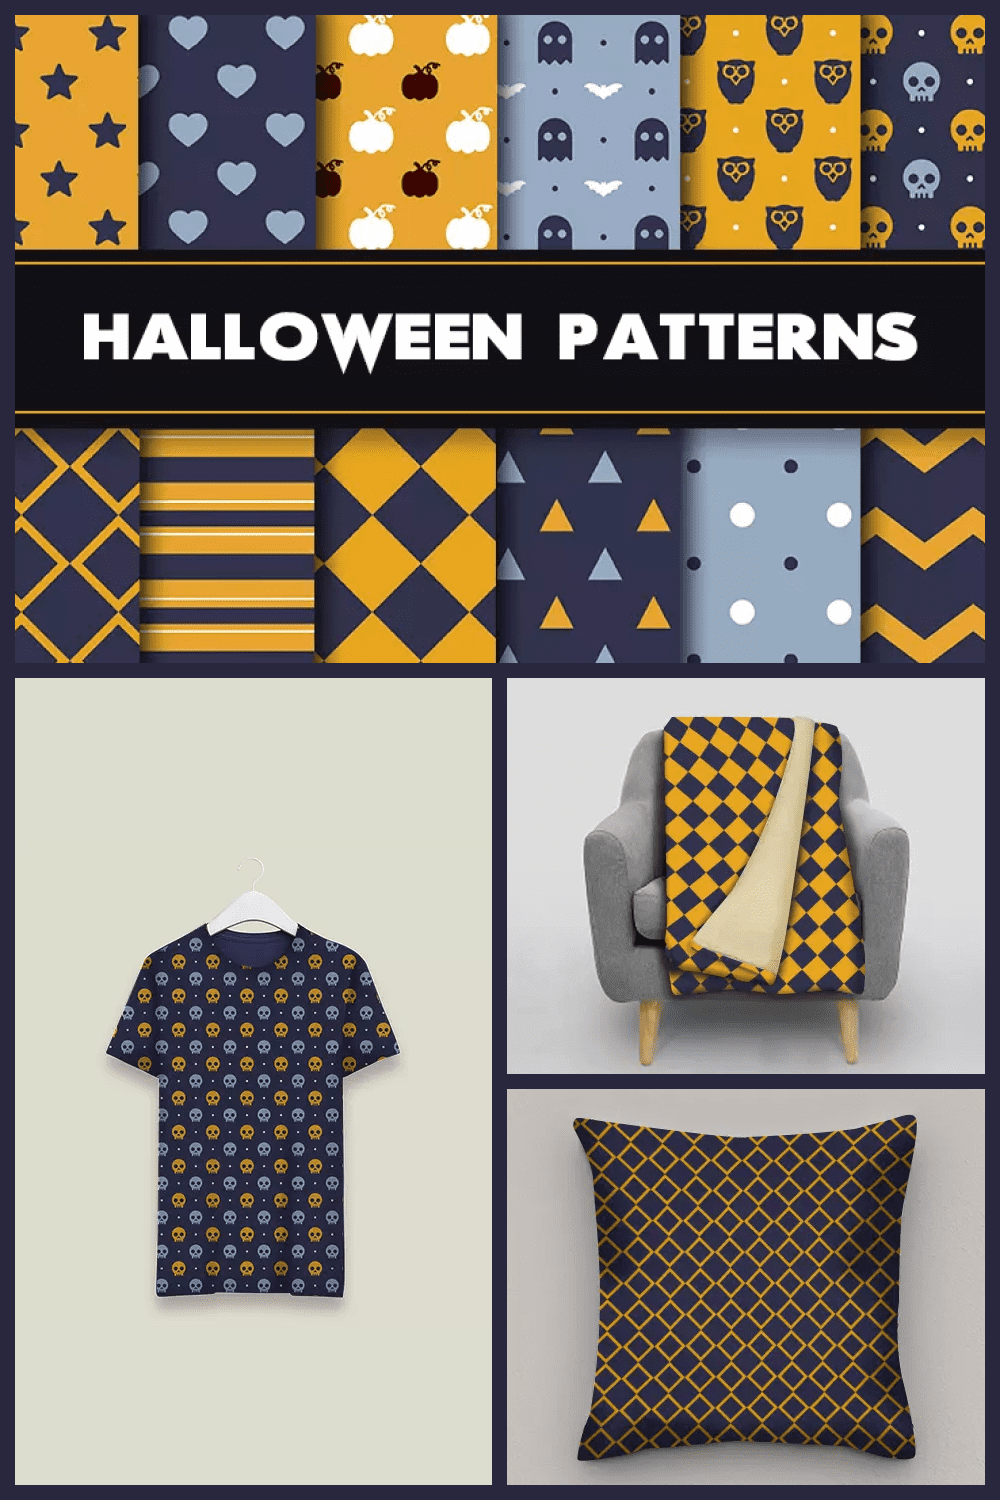 Collage of silhouettes of Halloween symbols on orange and blue background.